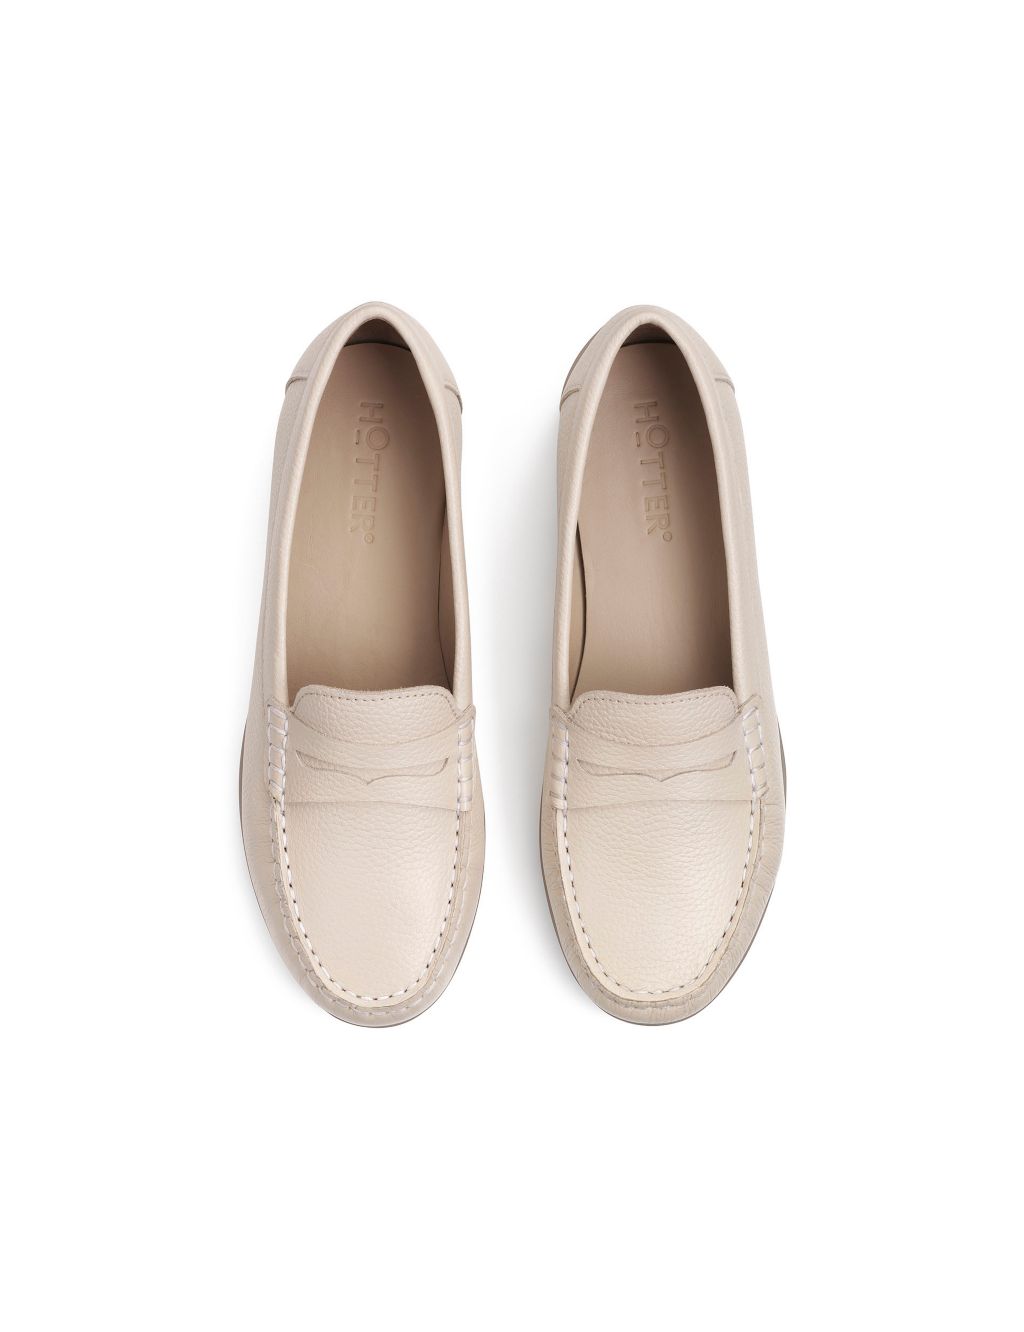 Pier Suede Flat Loafers image 3